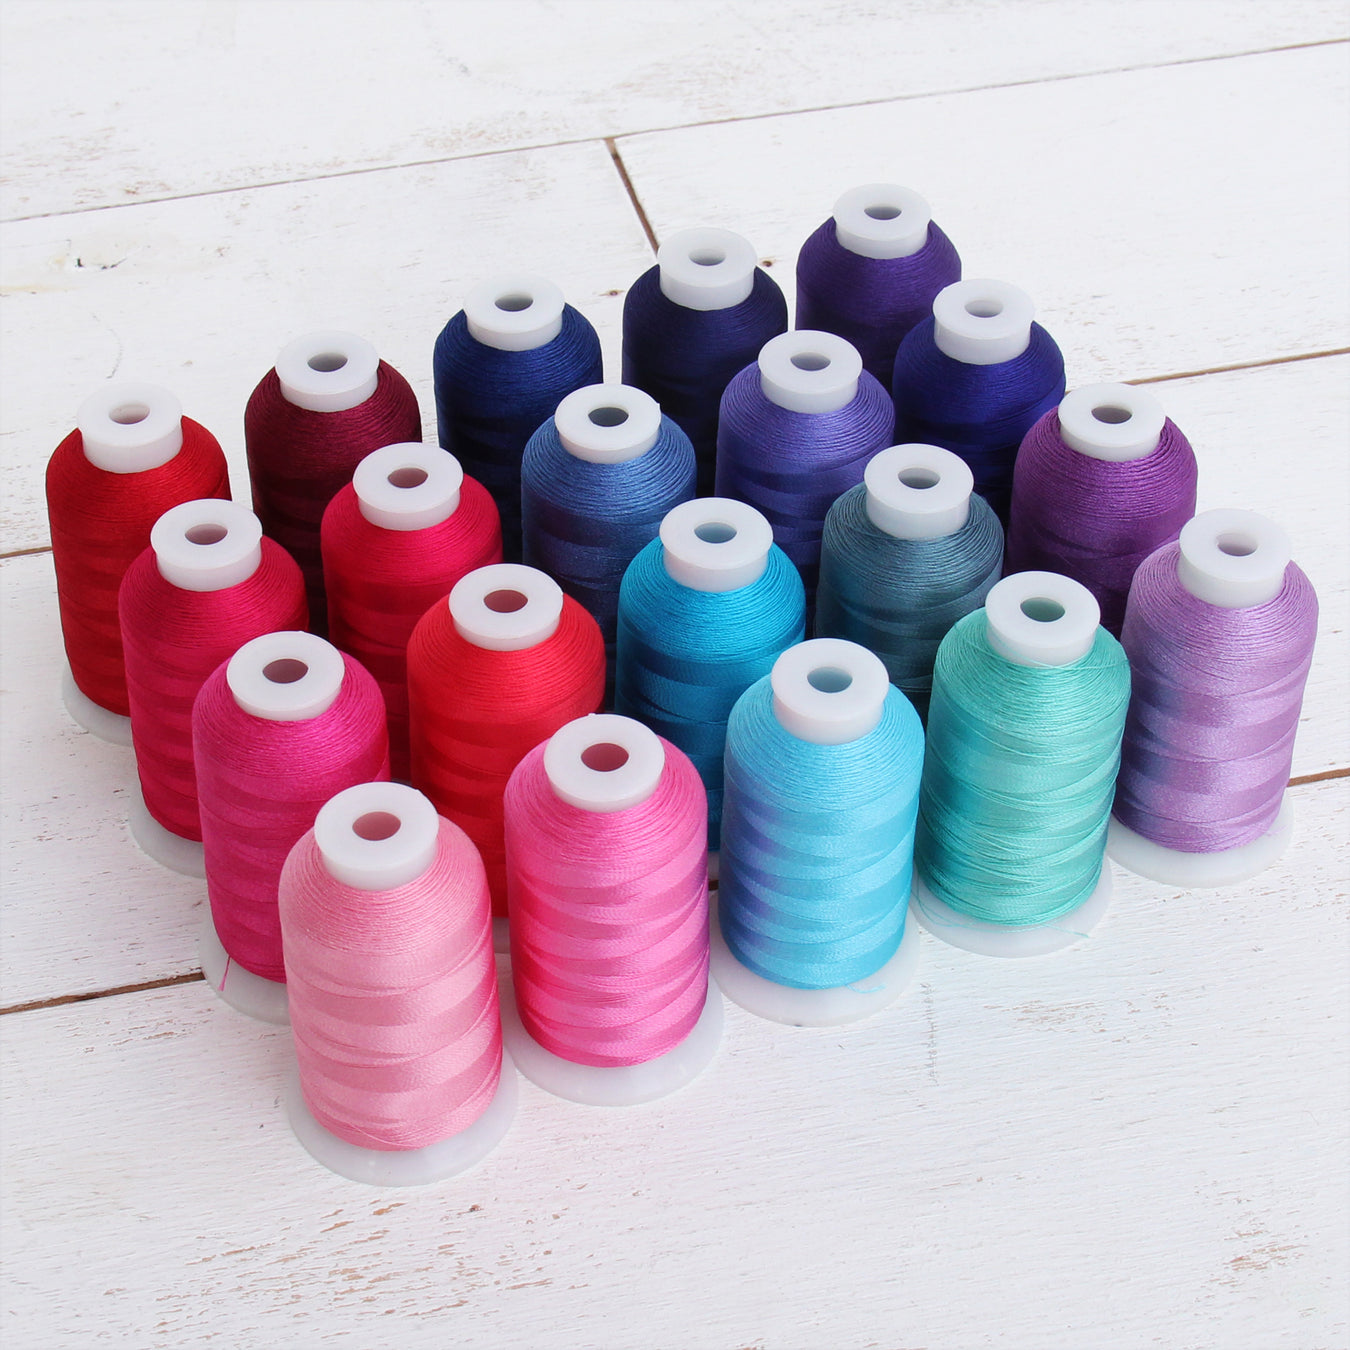 Bulk Heavy Duty Industrial High Strength Nylon Sewing Thread Thick & Strong  Wholesale